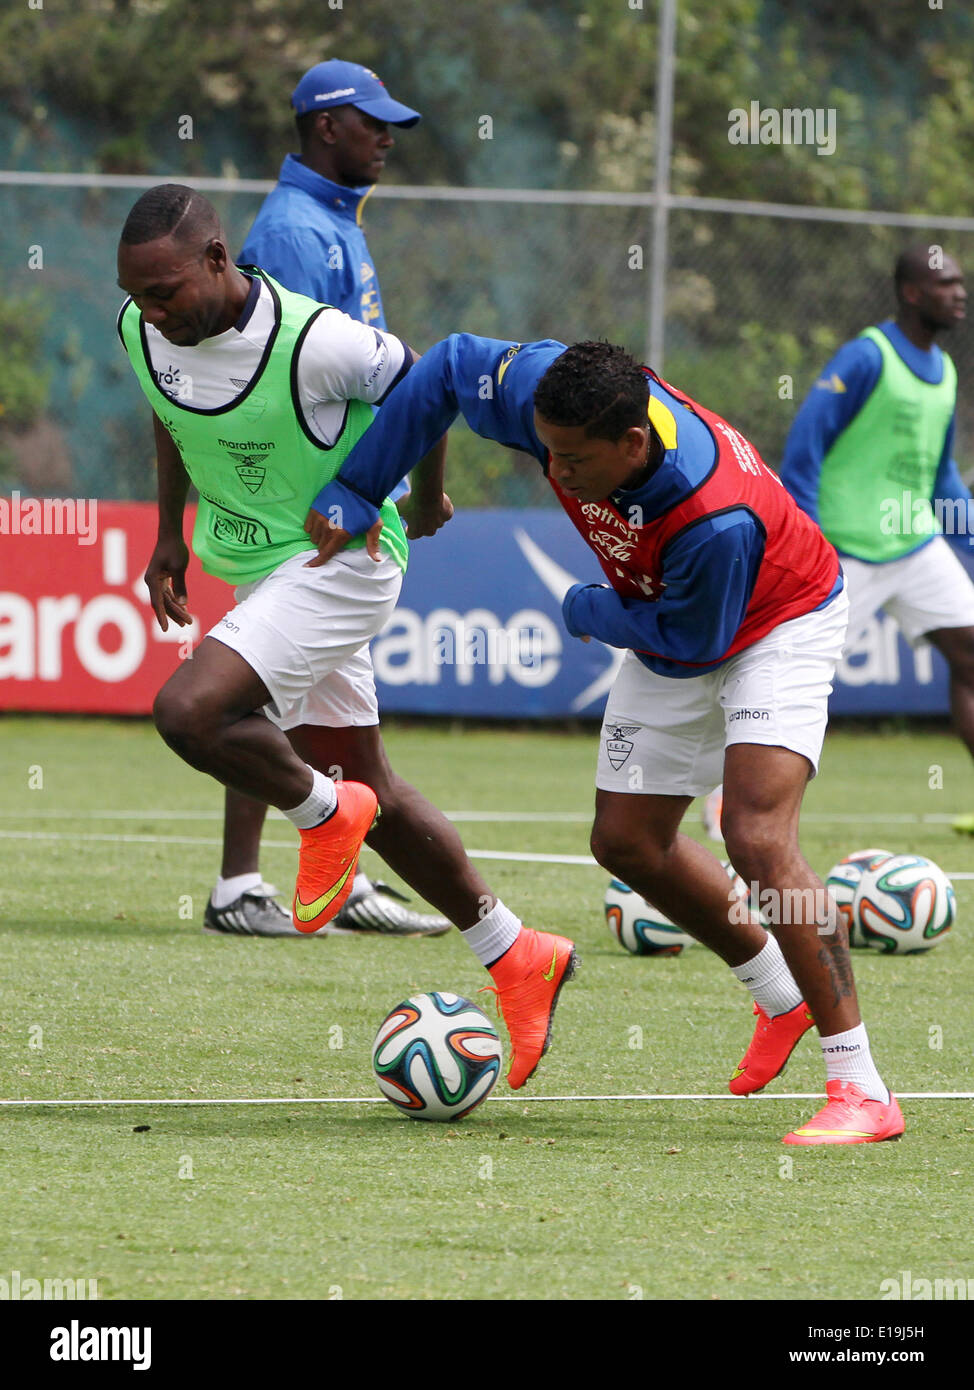 Quito, Ecuador. 27th May, 2014. Michael Arroyo (R) and Walter Ayovi of Ecuador's national soccer team take part in a training session at the 'Casa de la Seleccion' in Quito, capital of Ecuador, May 27, 2014. Ecuador is preparing for its friendly matches against Mexico and England, in the U.S., before the Brazil 2014 FIFA World Cup. Credit:  Santiago Armas/Xinhua/Alamy Live News Stock Photo